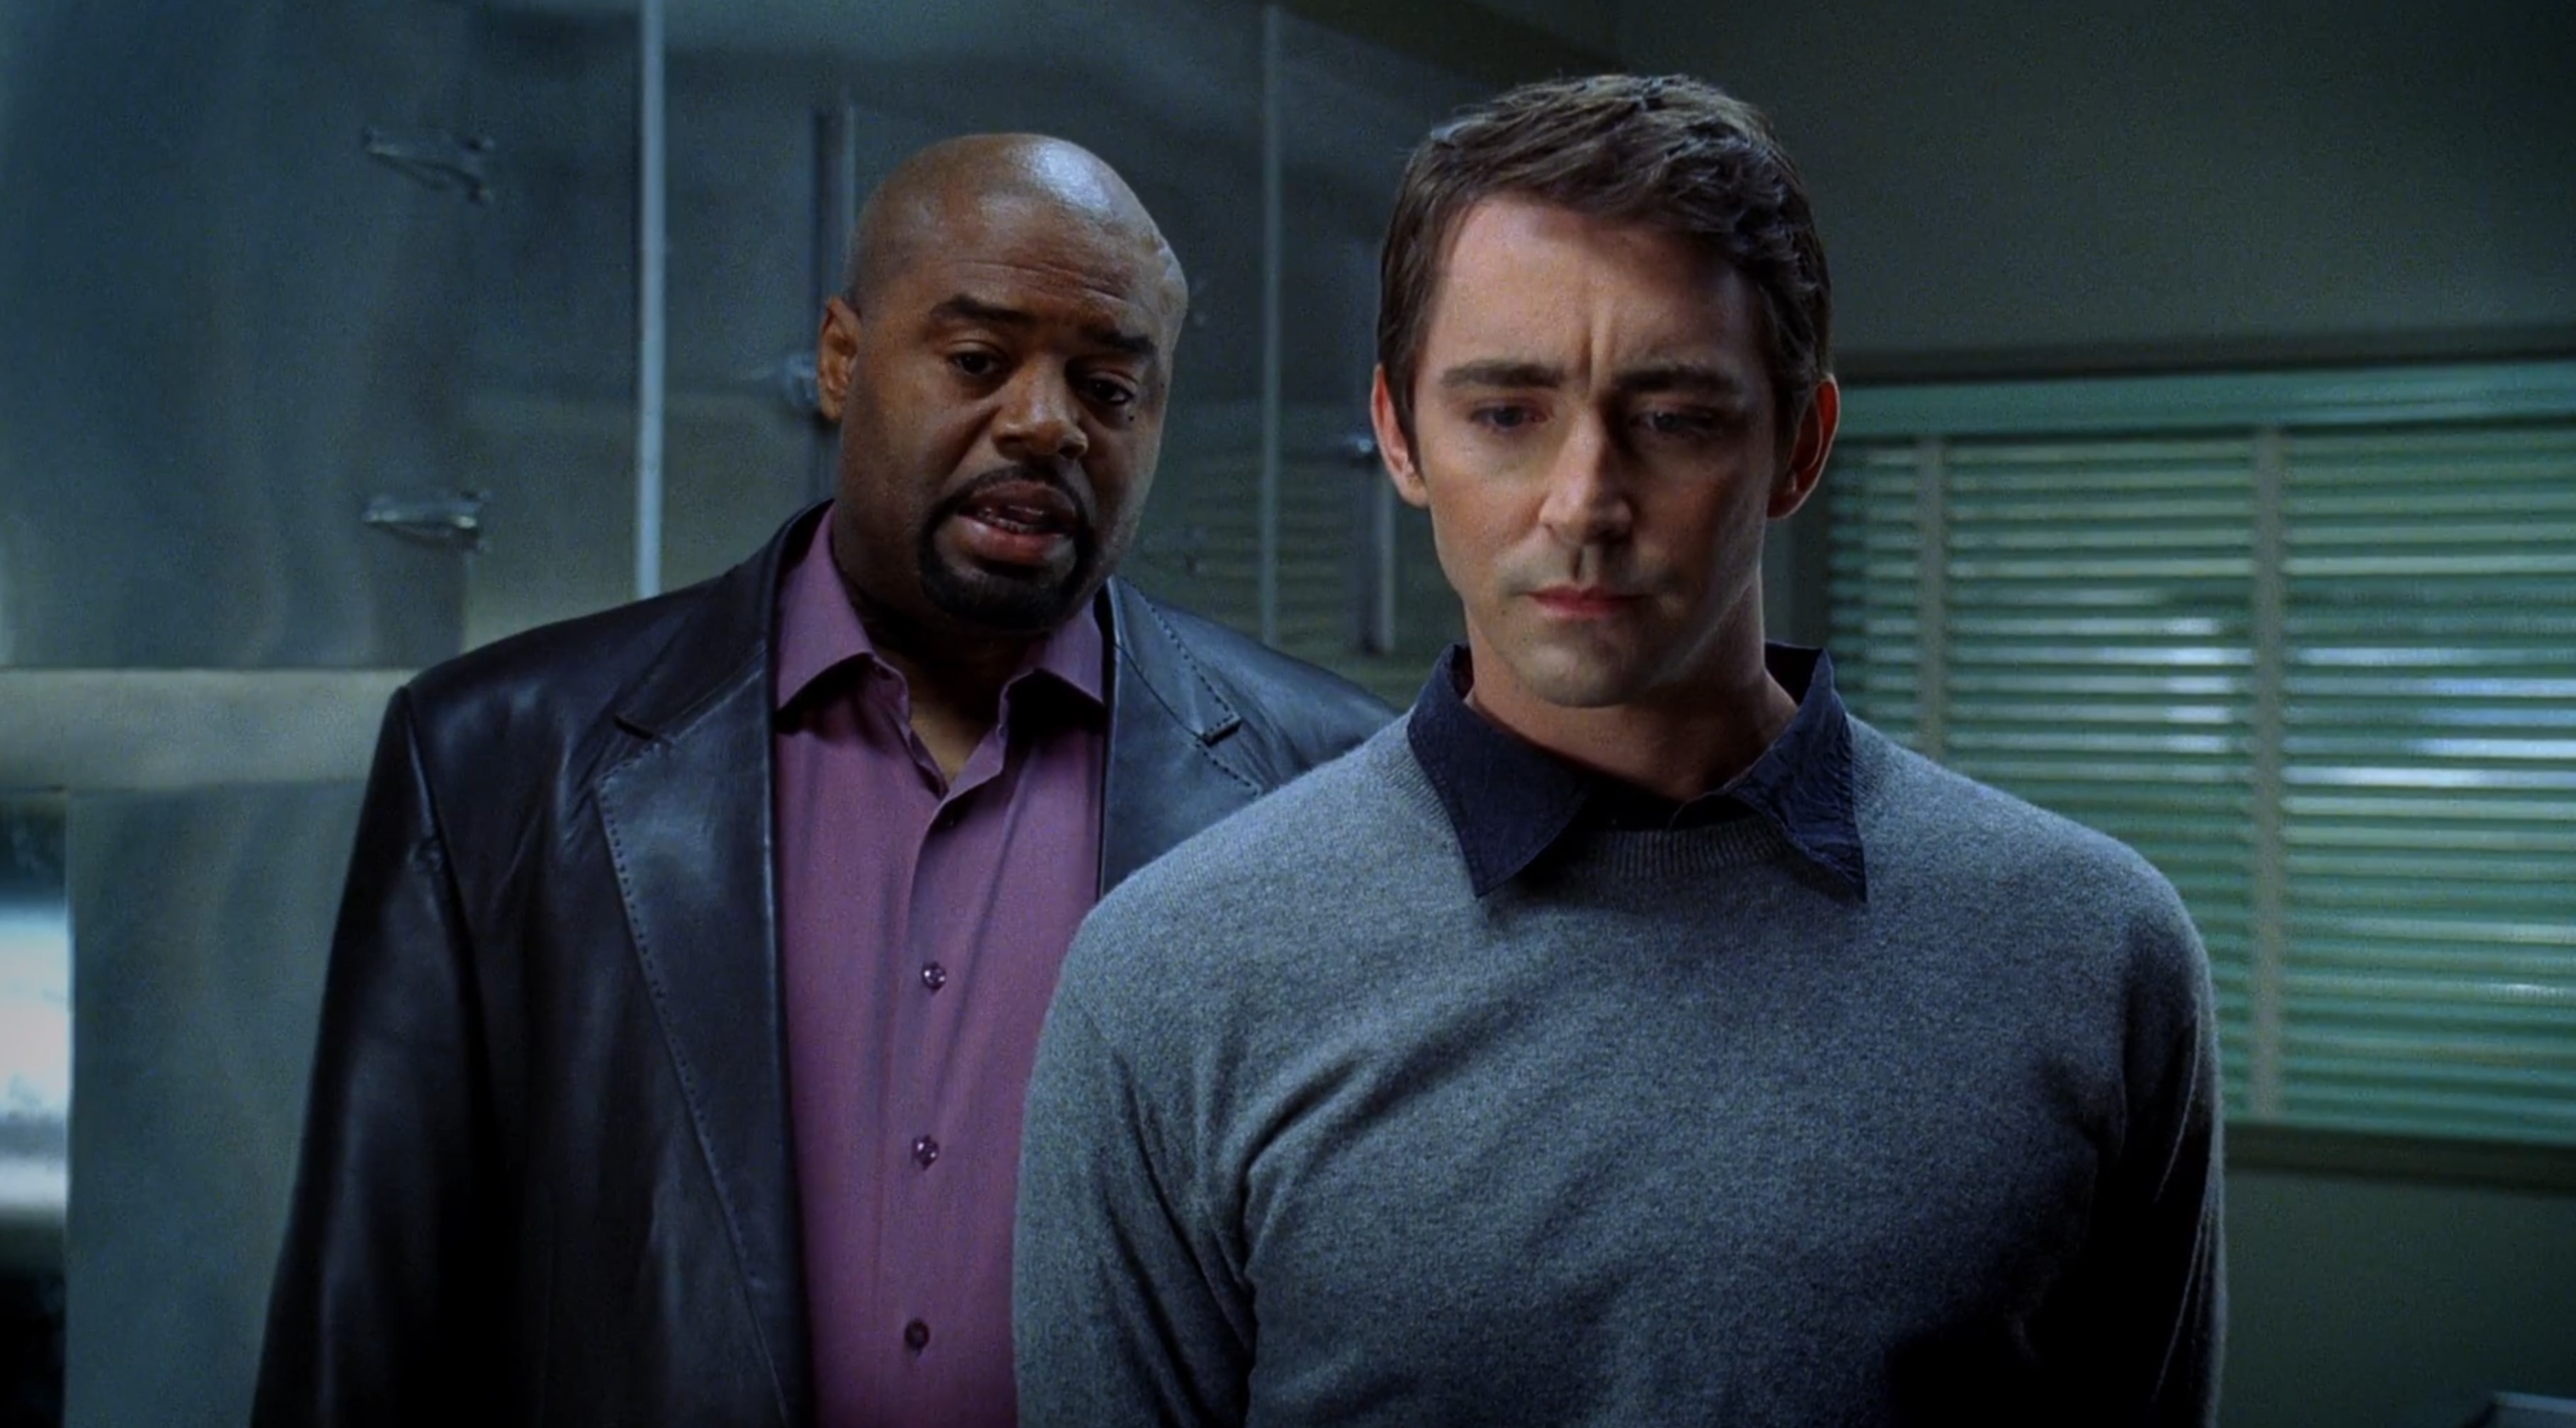 Emerson (Chi McBride) and Ned (Lee Pace) are pictured inside of a morgue. 

Pushing Daisies. Season 1, Episode 1: "Pie-Lette." 2007-2009. ABC.